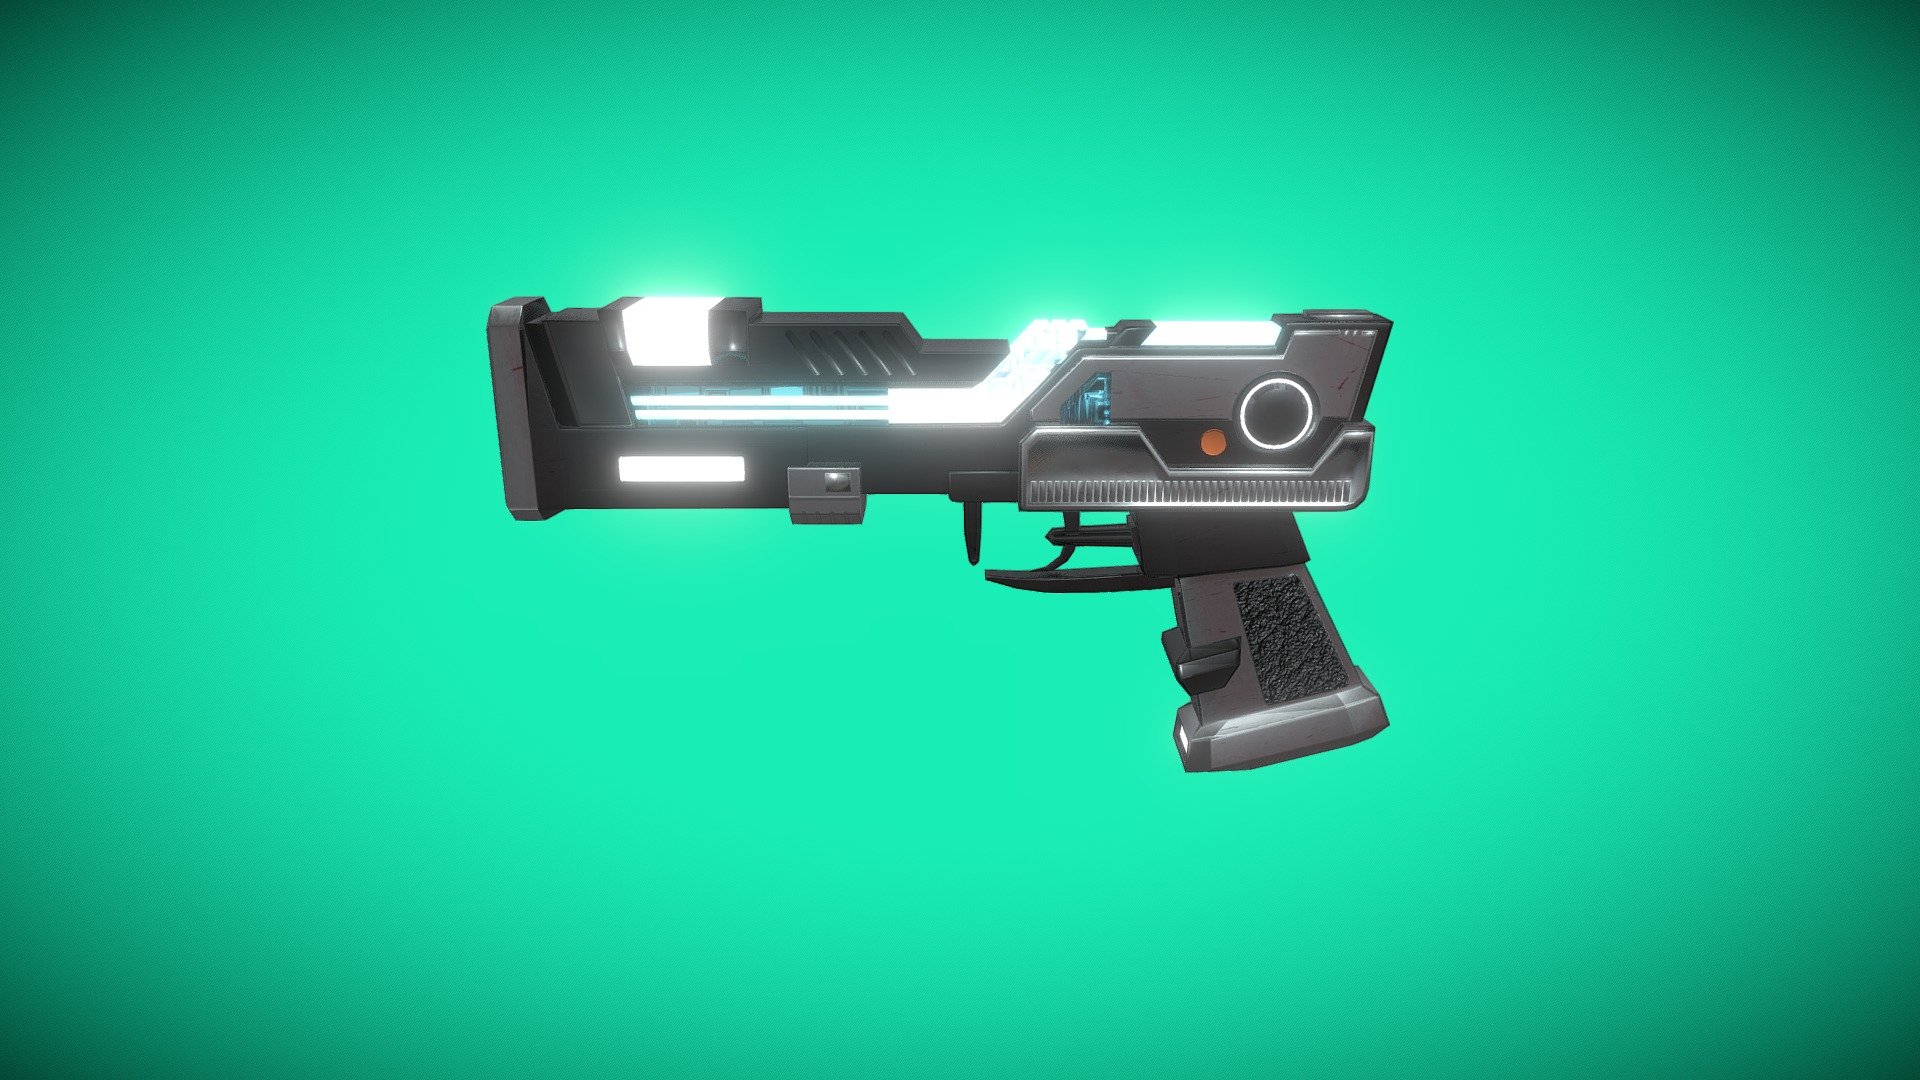 Sci-Fi Light Gun Low Poly Model, made in blender
Game Ready Asset
Texture Included

FBX, OBJ - Sci-Fi Light Gun_Low Poly - 3D model by bon1991 3d model